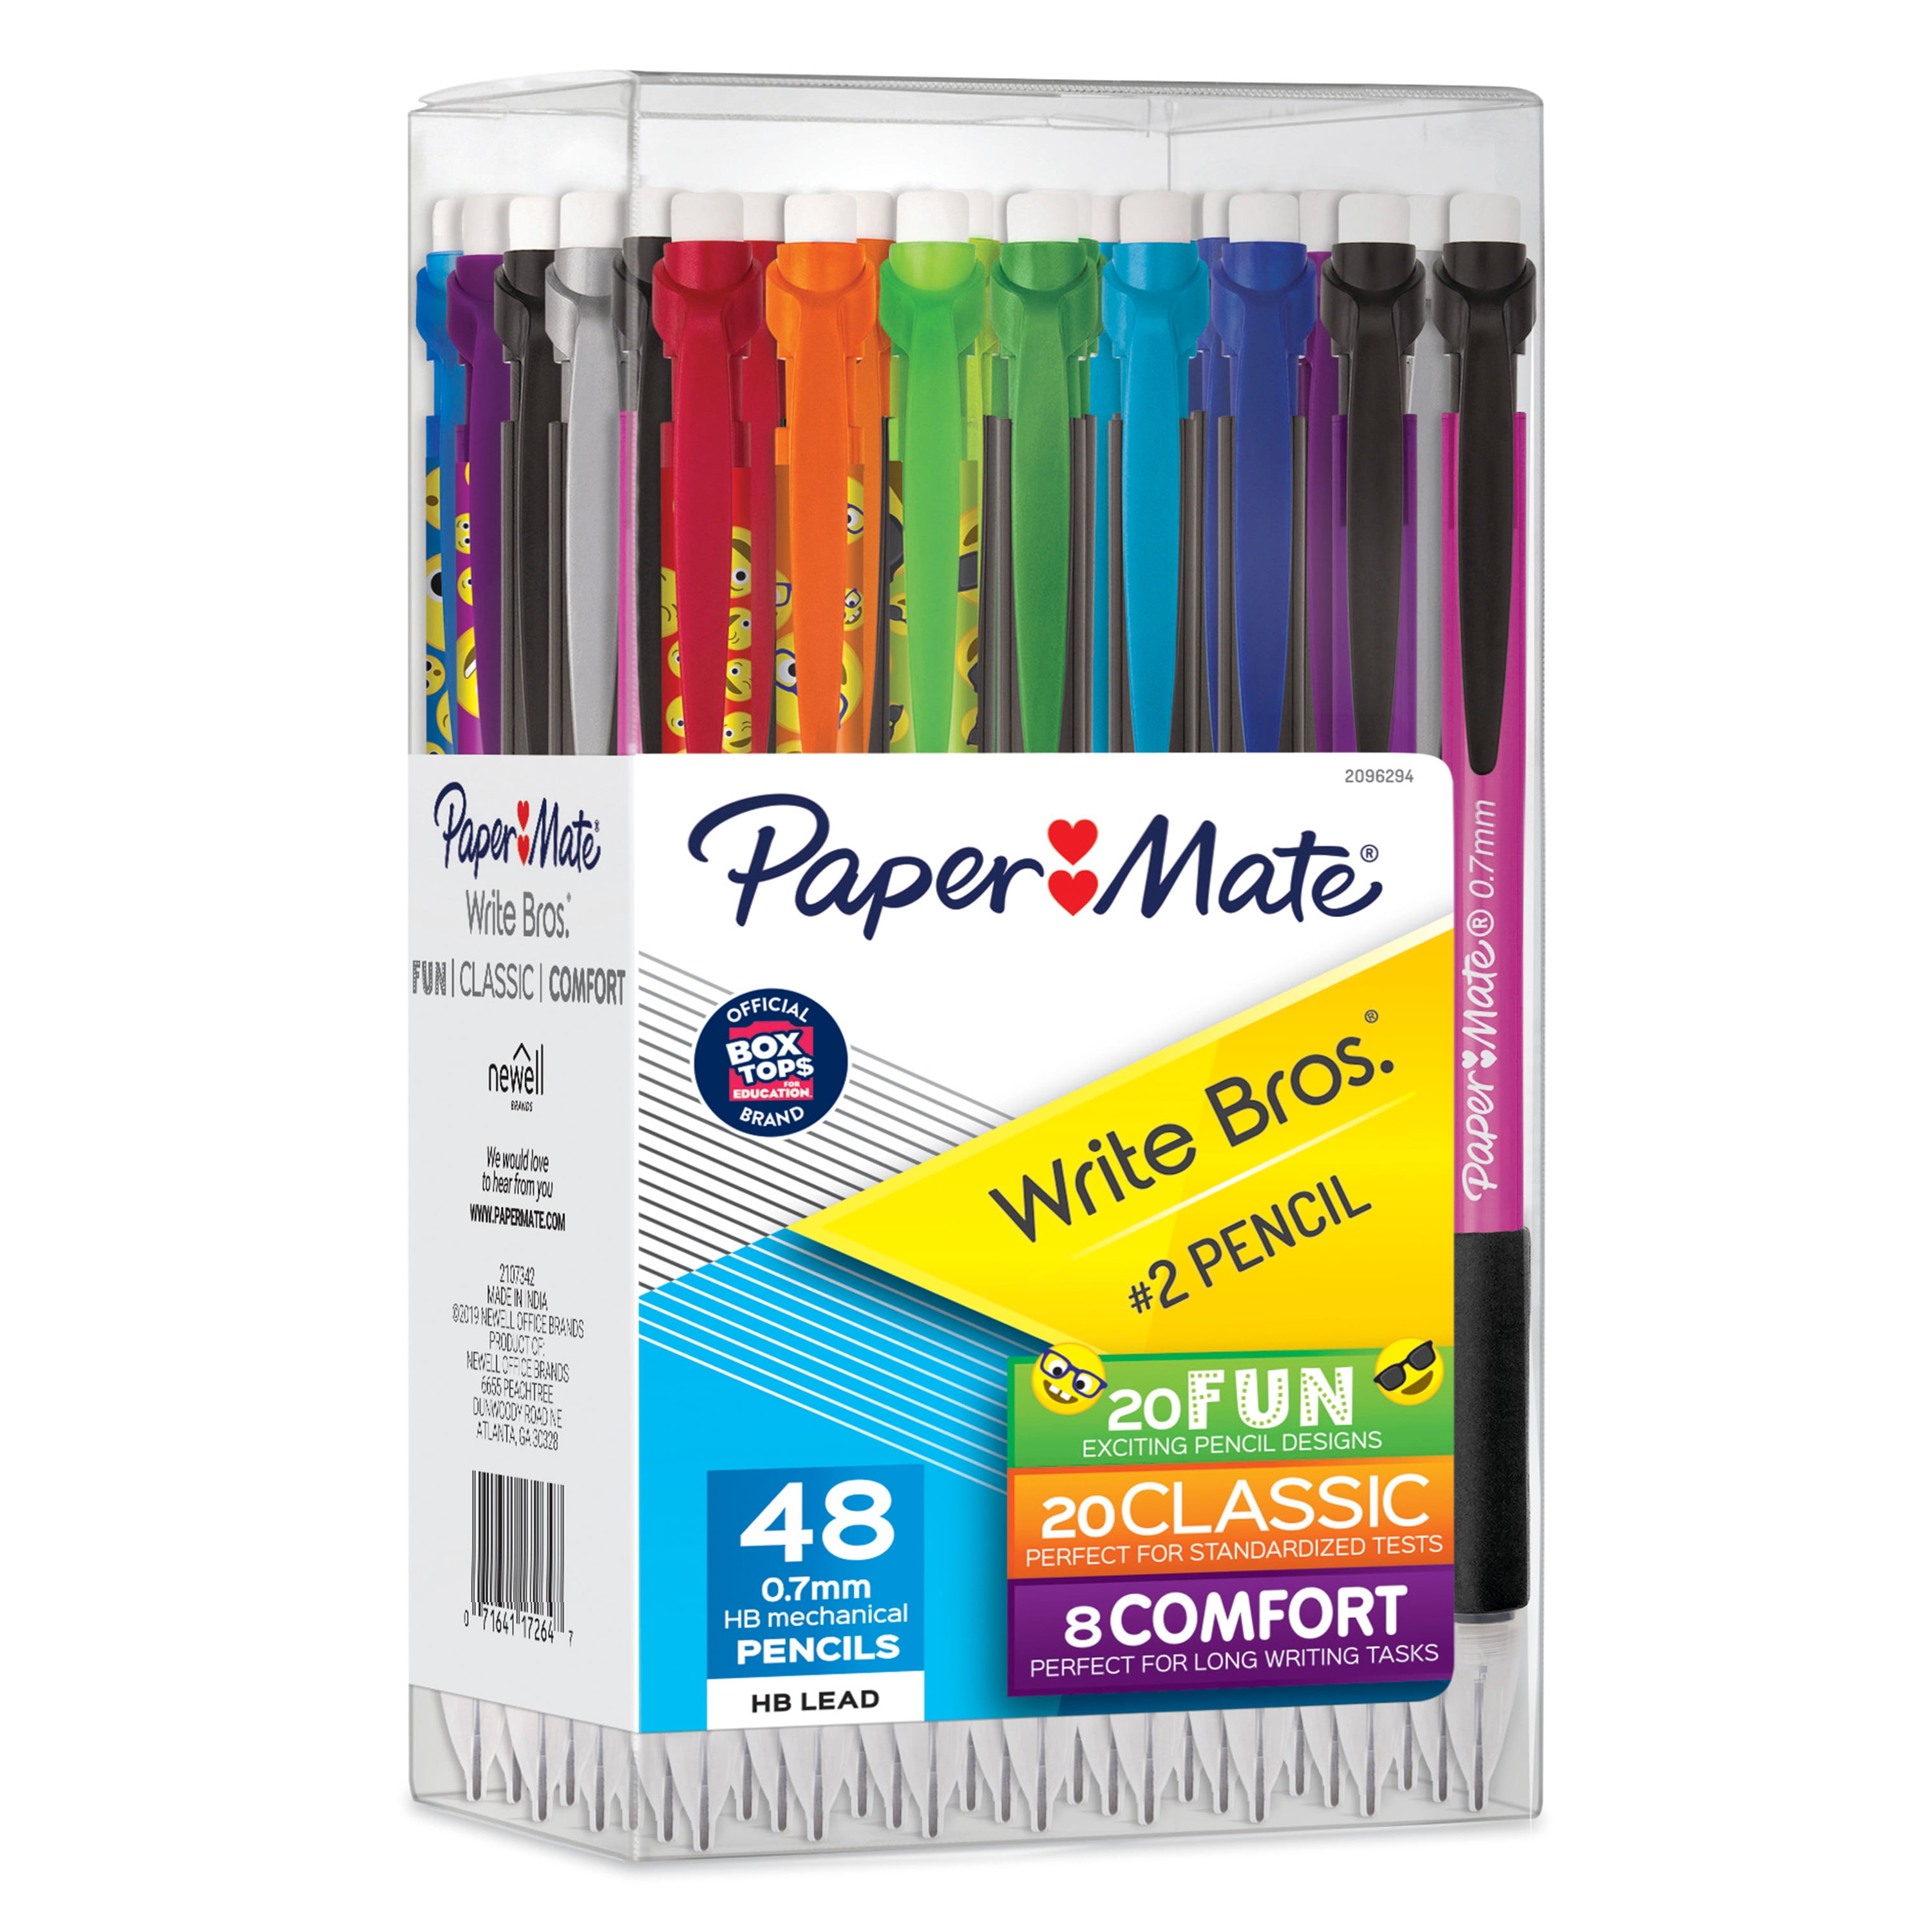 Paper Mate Write Bros Mechanical Pencils 30 Count HB #2 Assorted Colors 0.7mm 